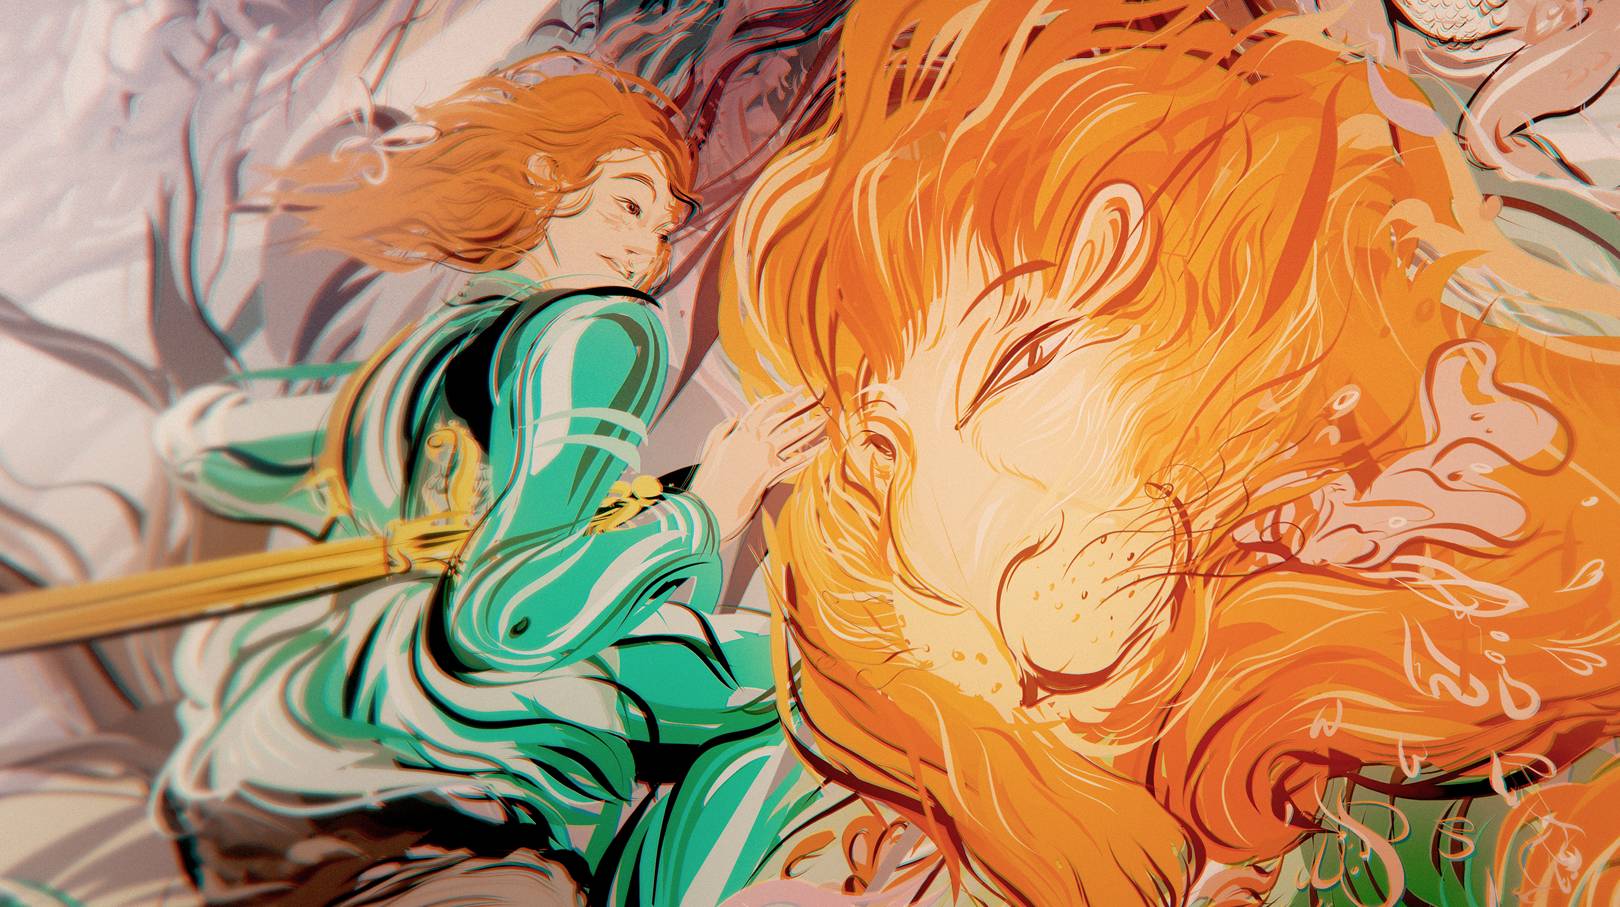 Oculus' Dear Angelica film is a hand-illustrated wonder created entirely inside VR